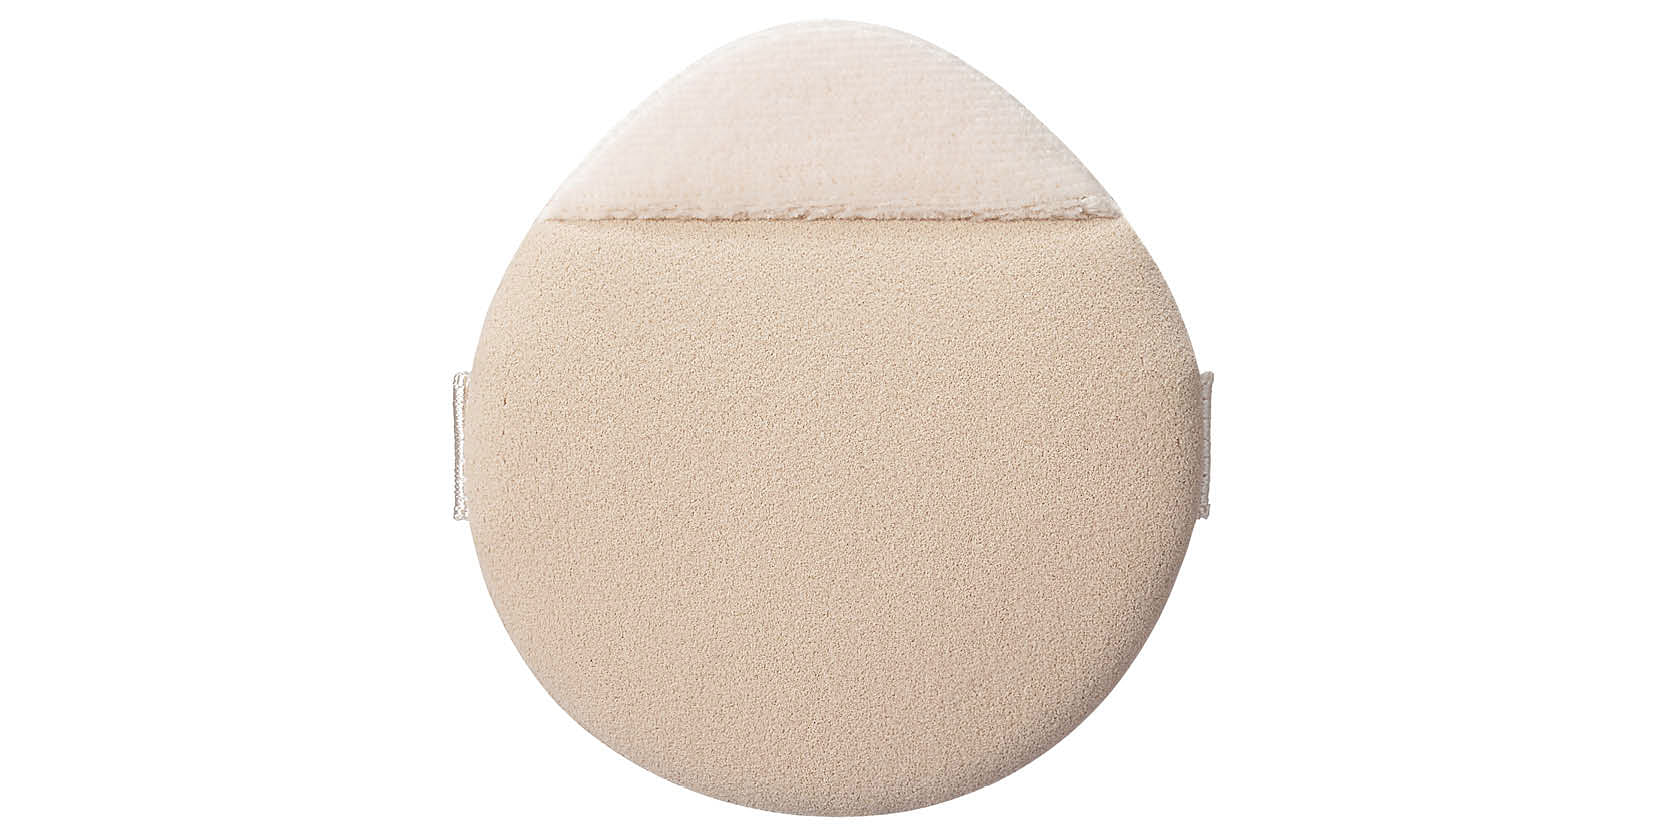 Applicator puff for Laneige Layering Cover Cushion & Concealing Base